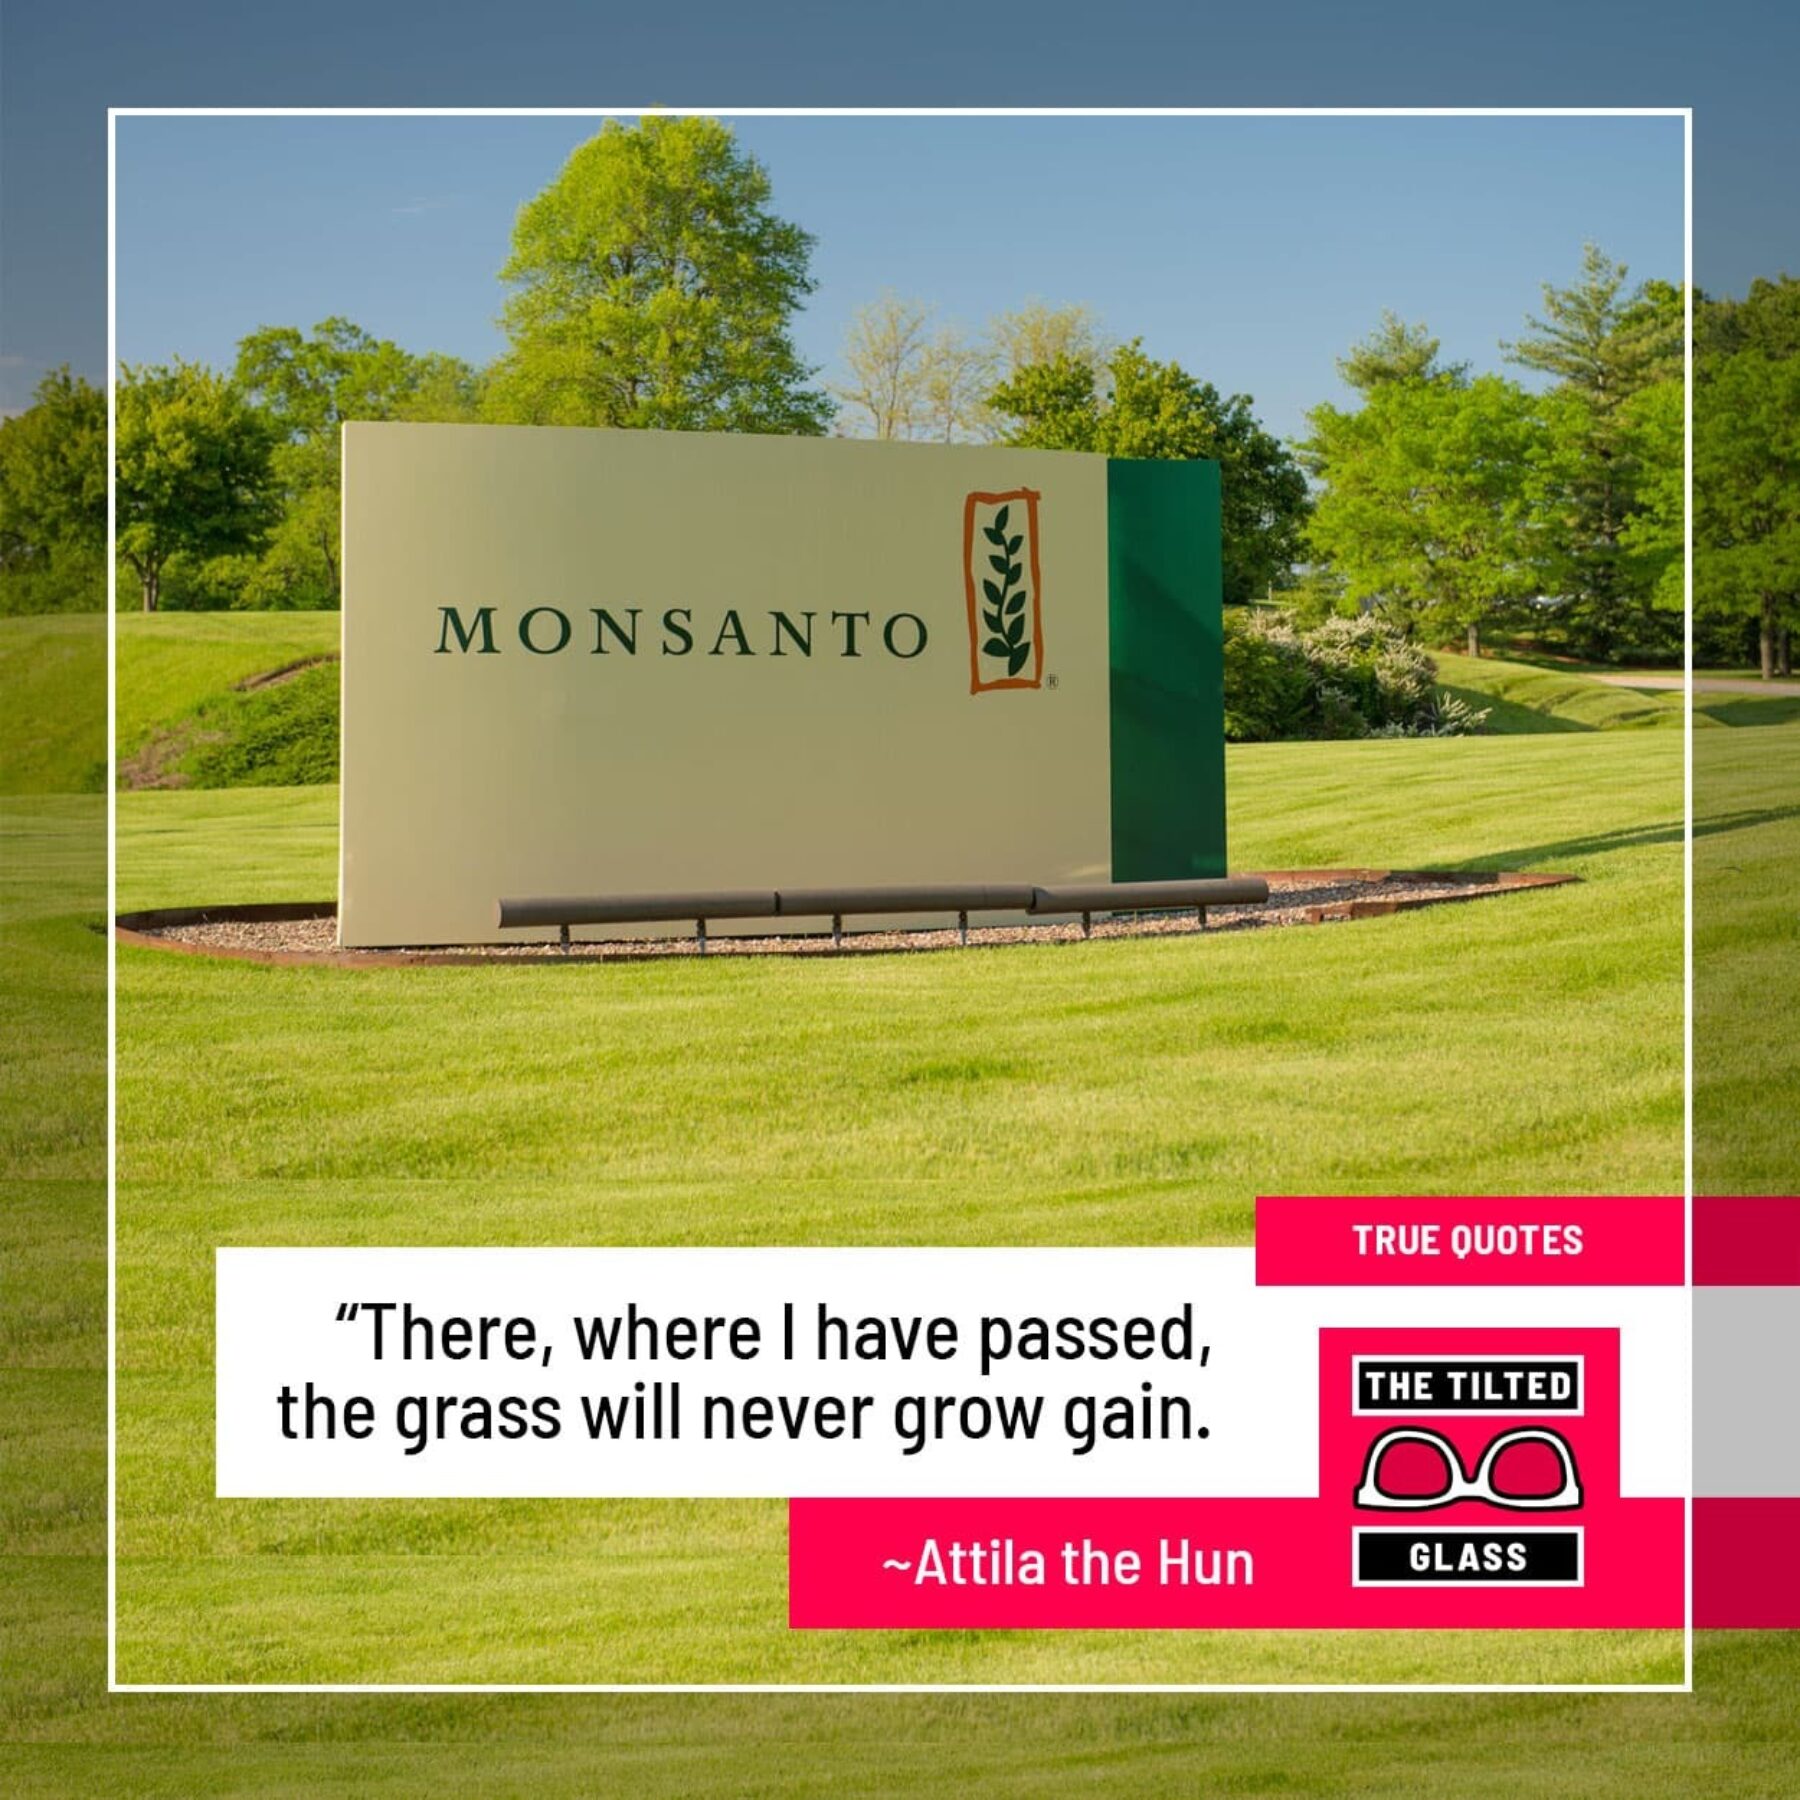 Monsanto: "There, where I have passed, the grass will never grow gain."